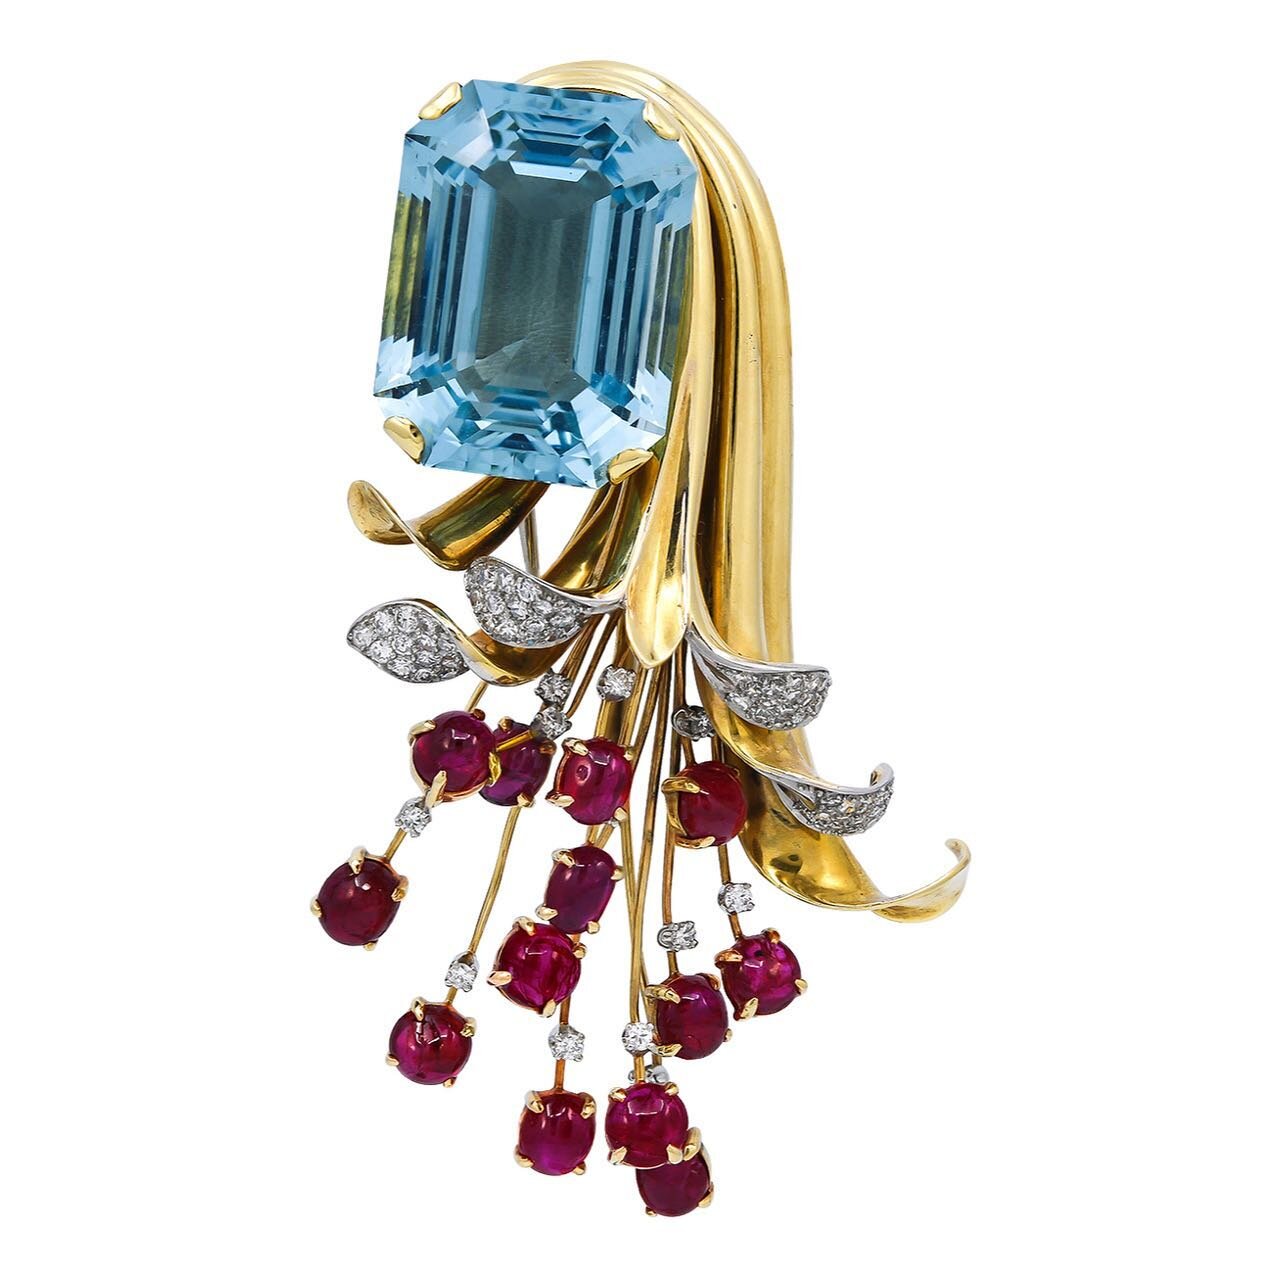 Abstracted gold floral brooch set with a large rectangular-cut aquamarine, extending into a wirework spray set with cabochon rubies emerging from diamond-set petals. Paul Flato, ca. 1940. Available✨